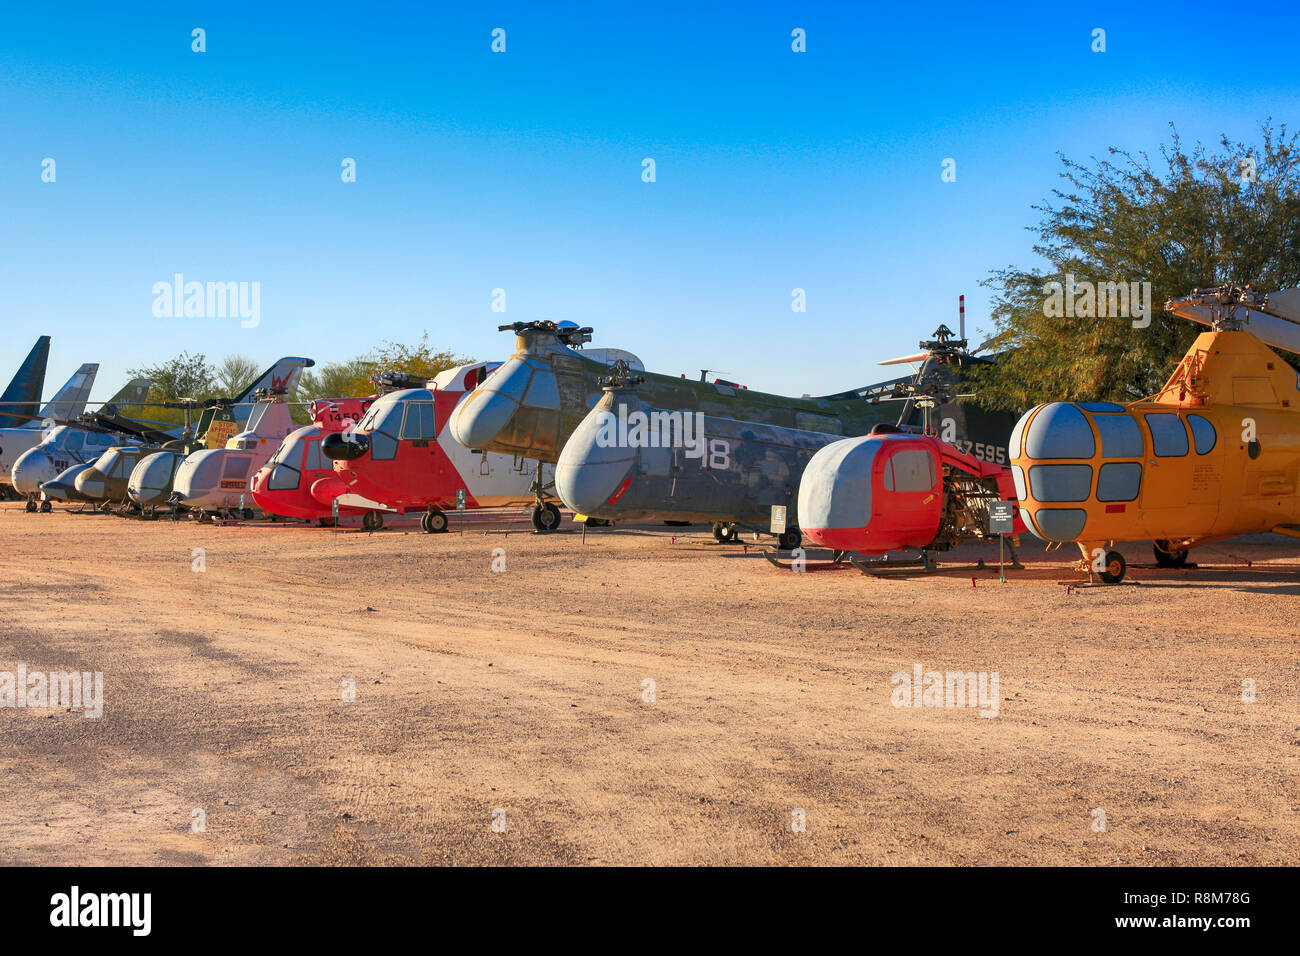 Collection of 1950-60s Sikorsky helicopters on display at the Pima Air & Space Museum in Tucson, AZ Stock Photo